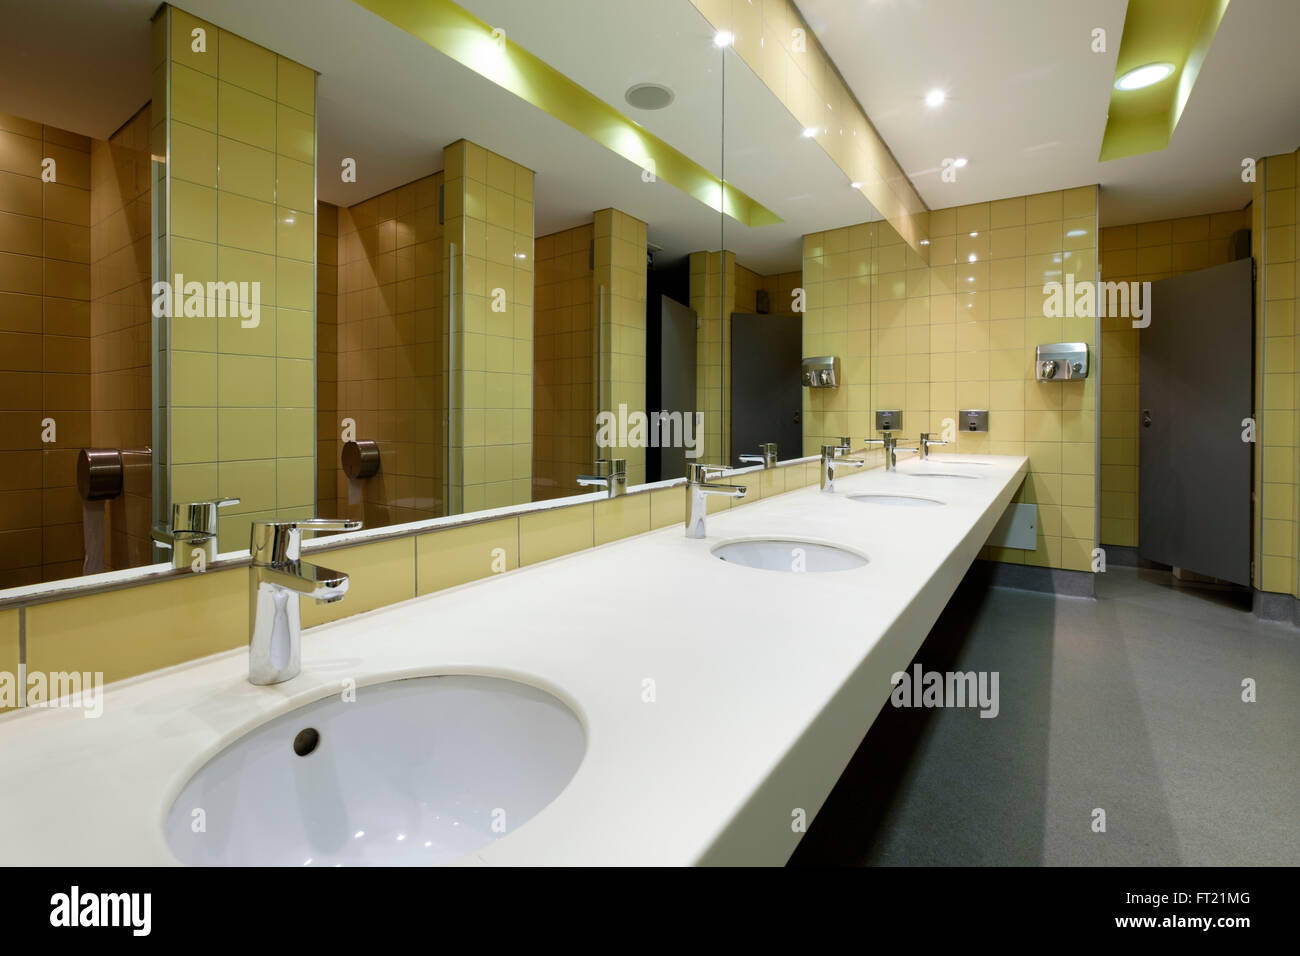 https://c8.alamy.com/comp/FT21MG/public-restroom-with-a-row-of-lavatories-in-front-of-a-large-mirror-FT21MG.jpg